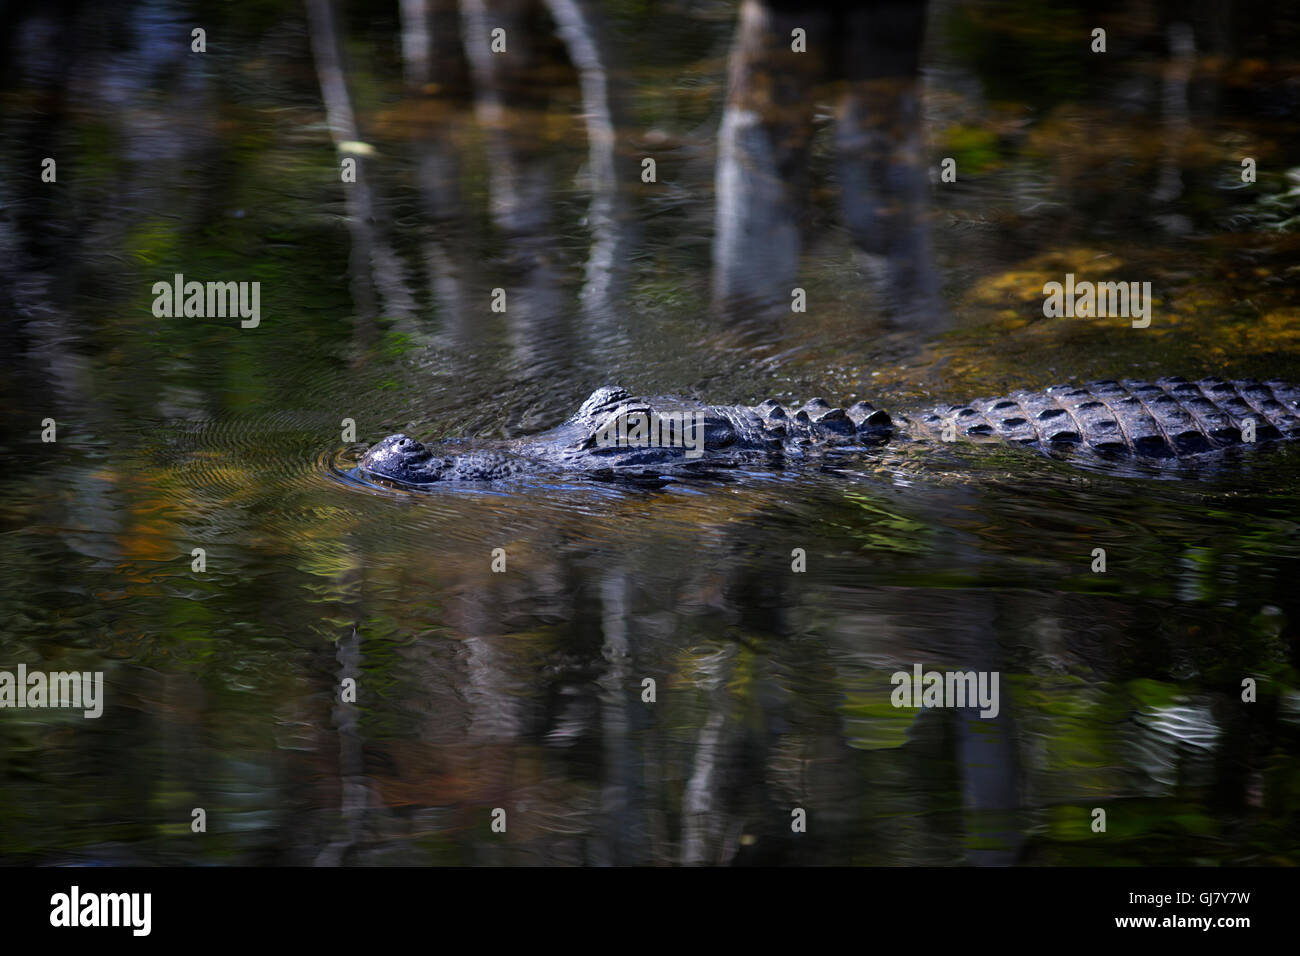 An American Alligator cruises through Big Cypress swamp amid earthy colors and reflections in a serene natural setting. Stock Photo